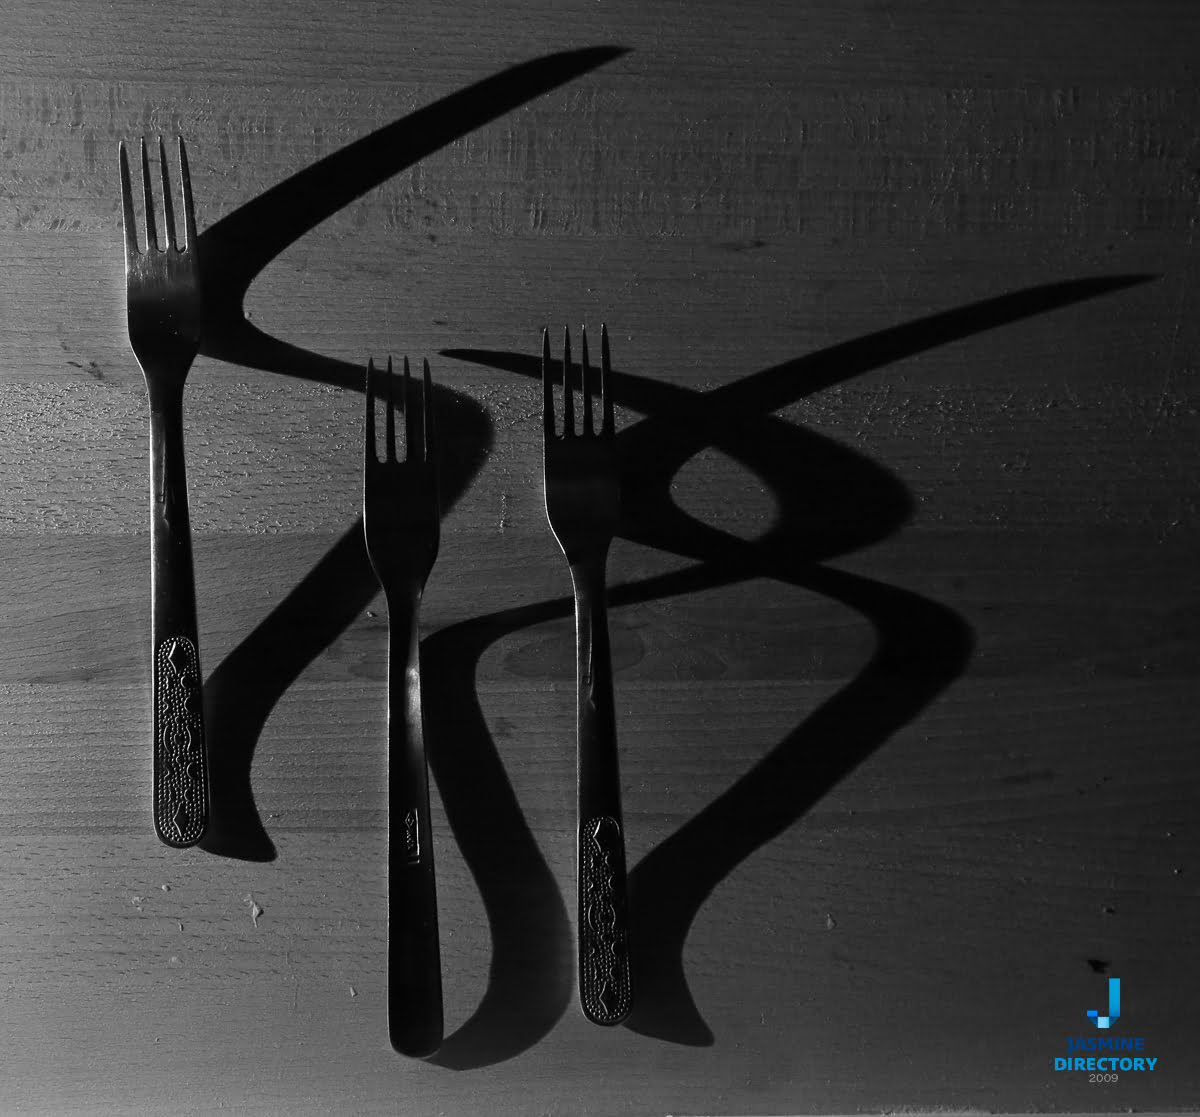 Forks and shadows